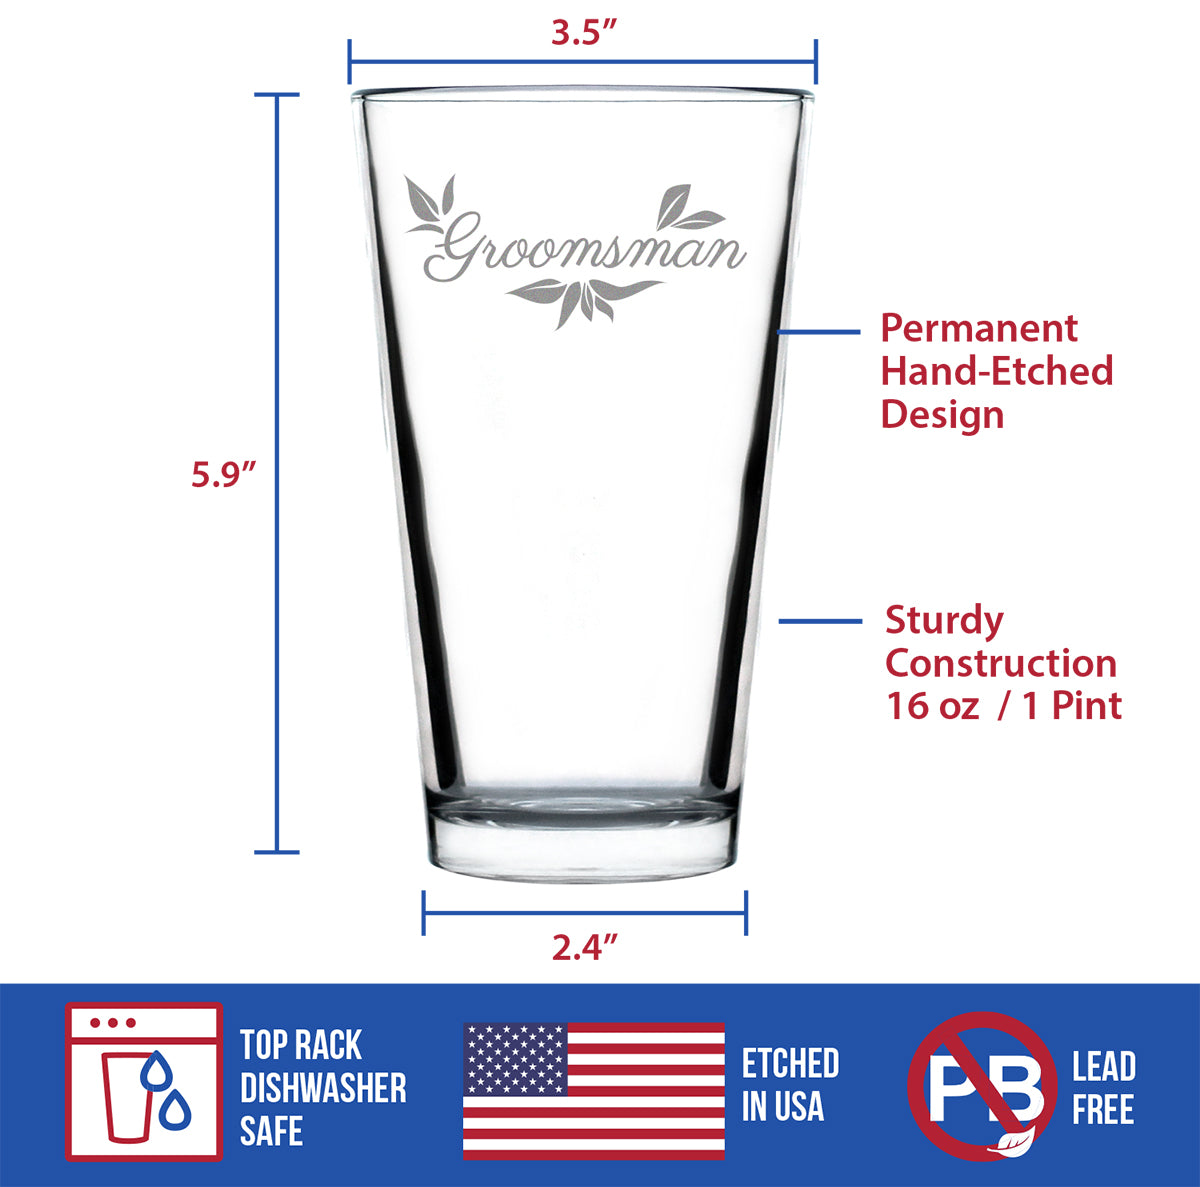 Groomsman Pint Glass - Groomsmen Proposal Gifts - Unique Engraved Wedding Cup Gift